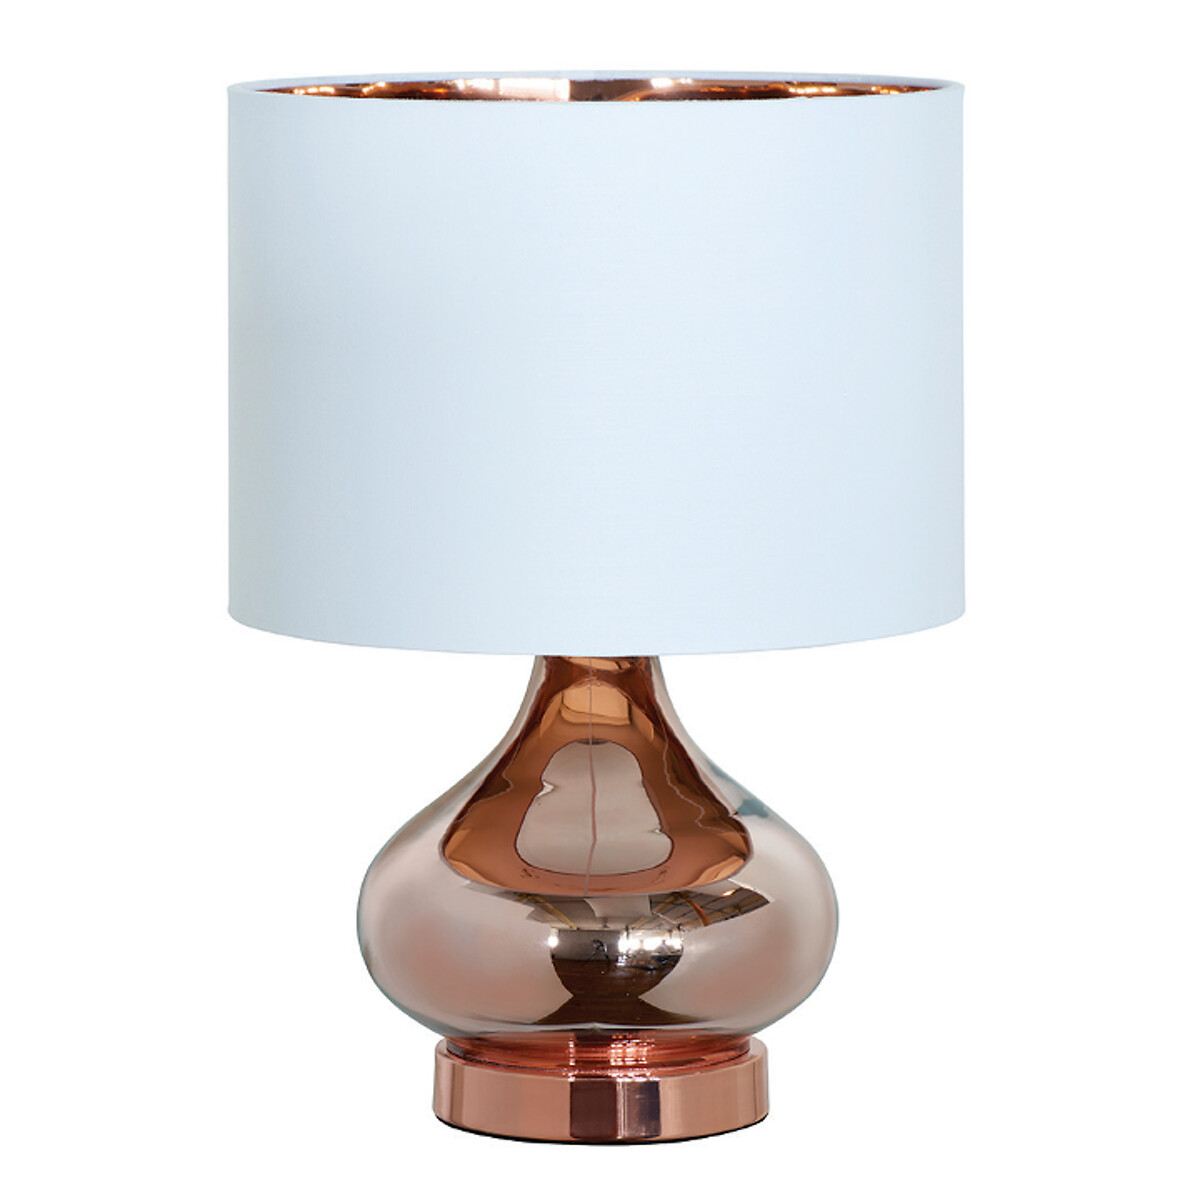 Copper High Shine Metallic Table Lamp, Copper Coloured Lamp Shades For Bedroom